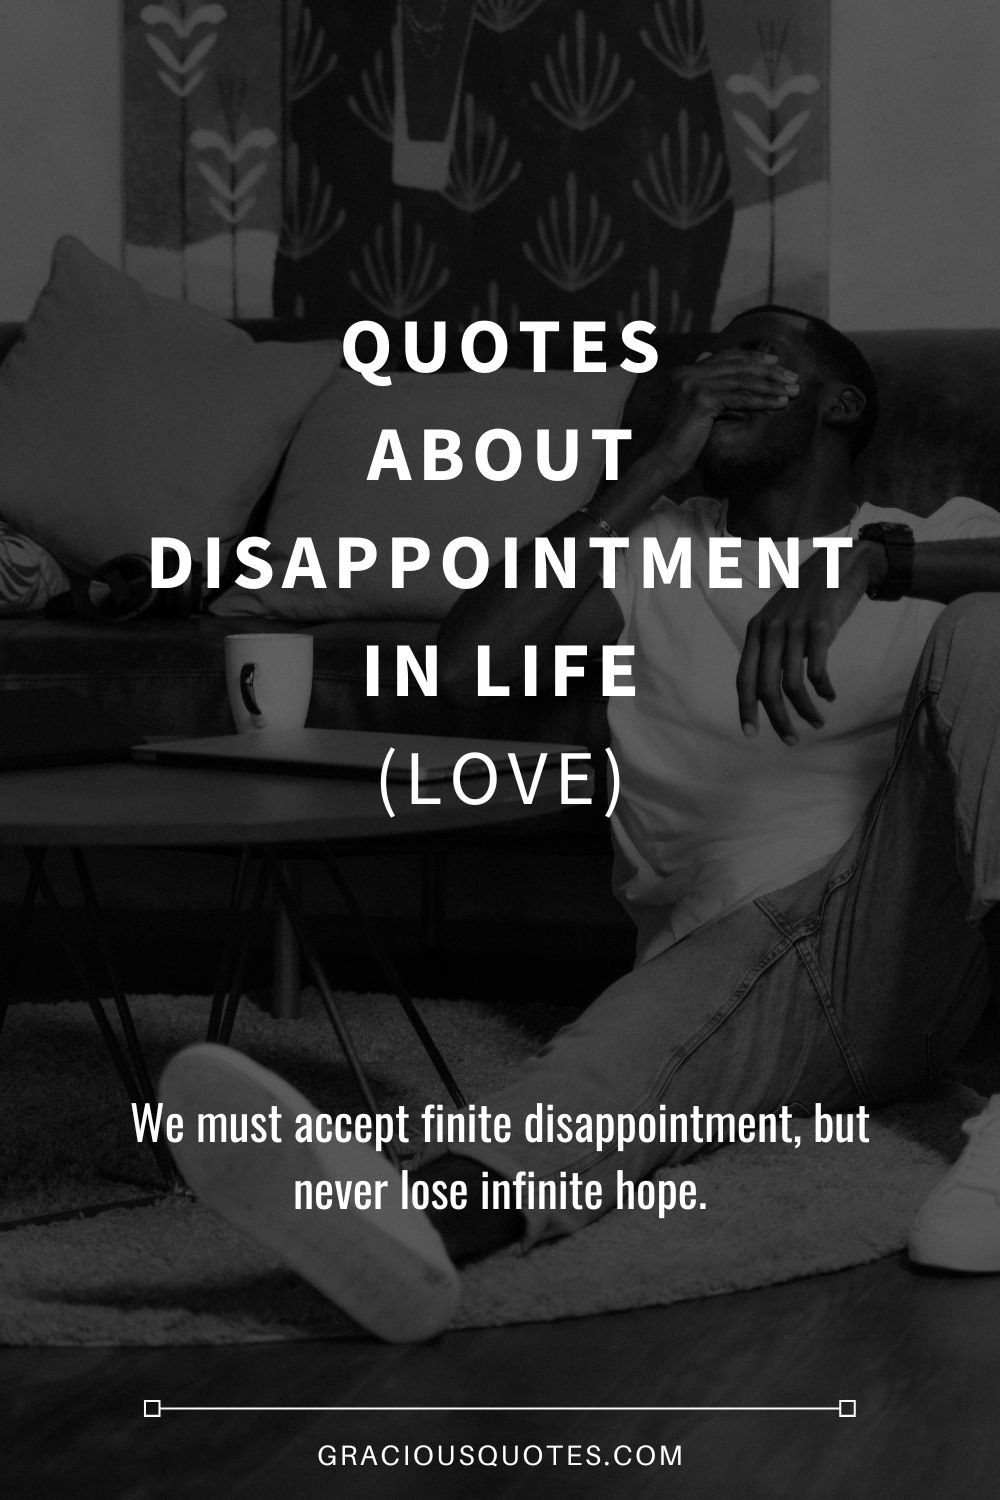 Quotes About Disappointment in Life (LOVE) - Gracious Quotes